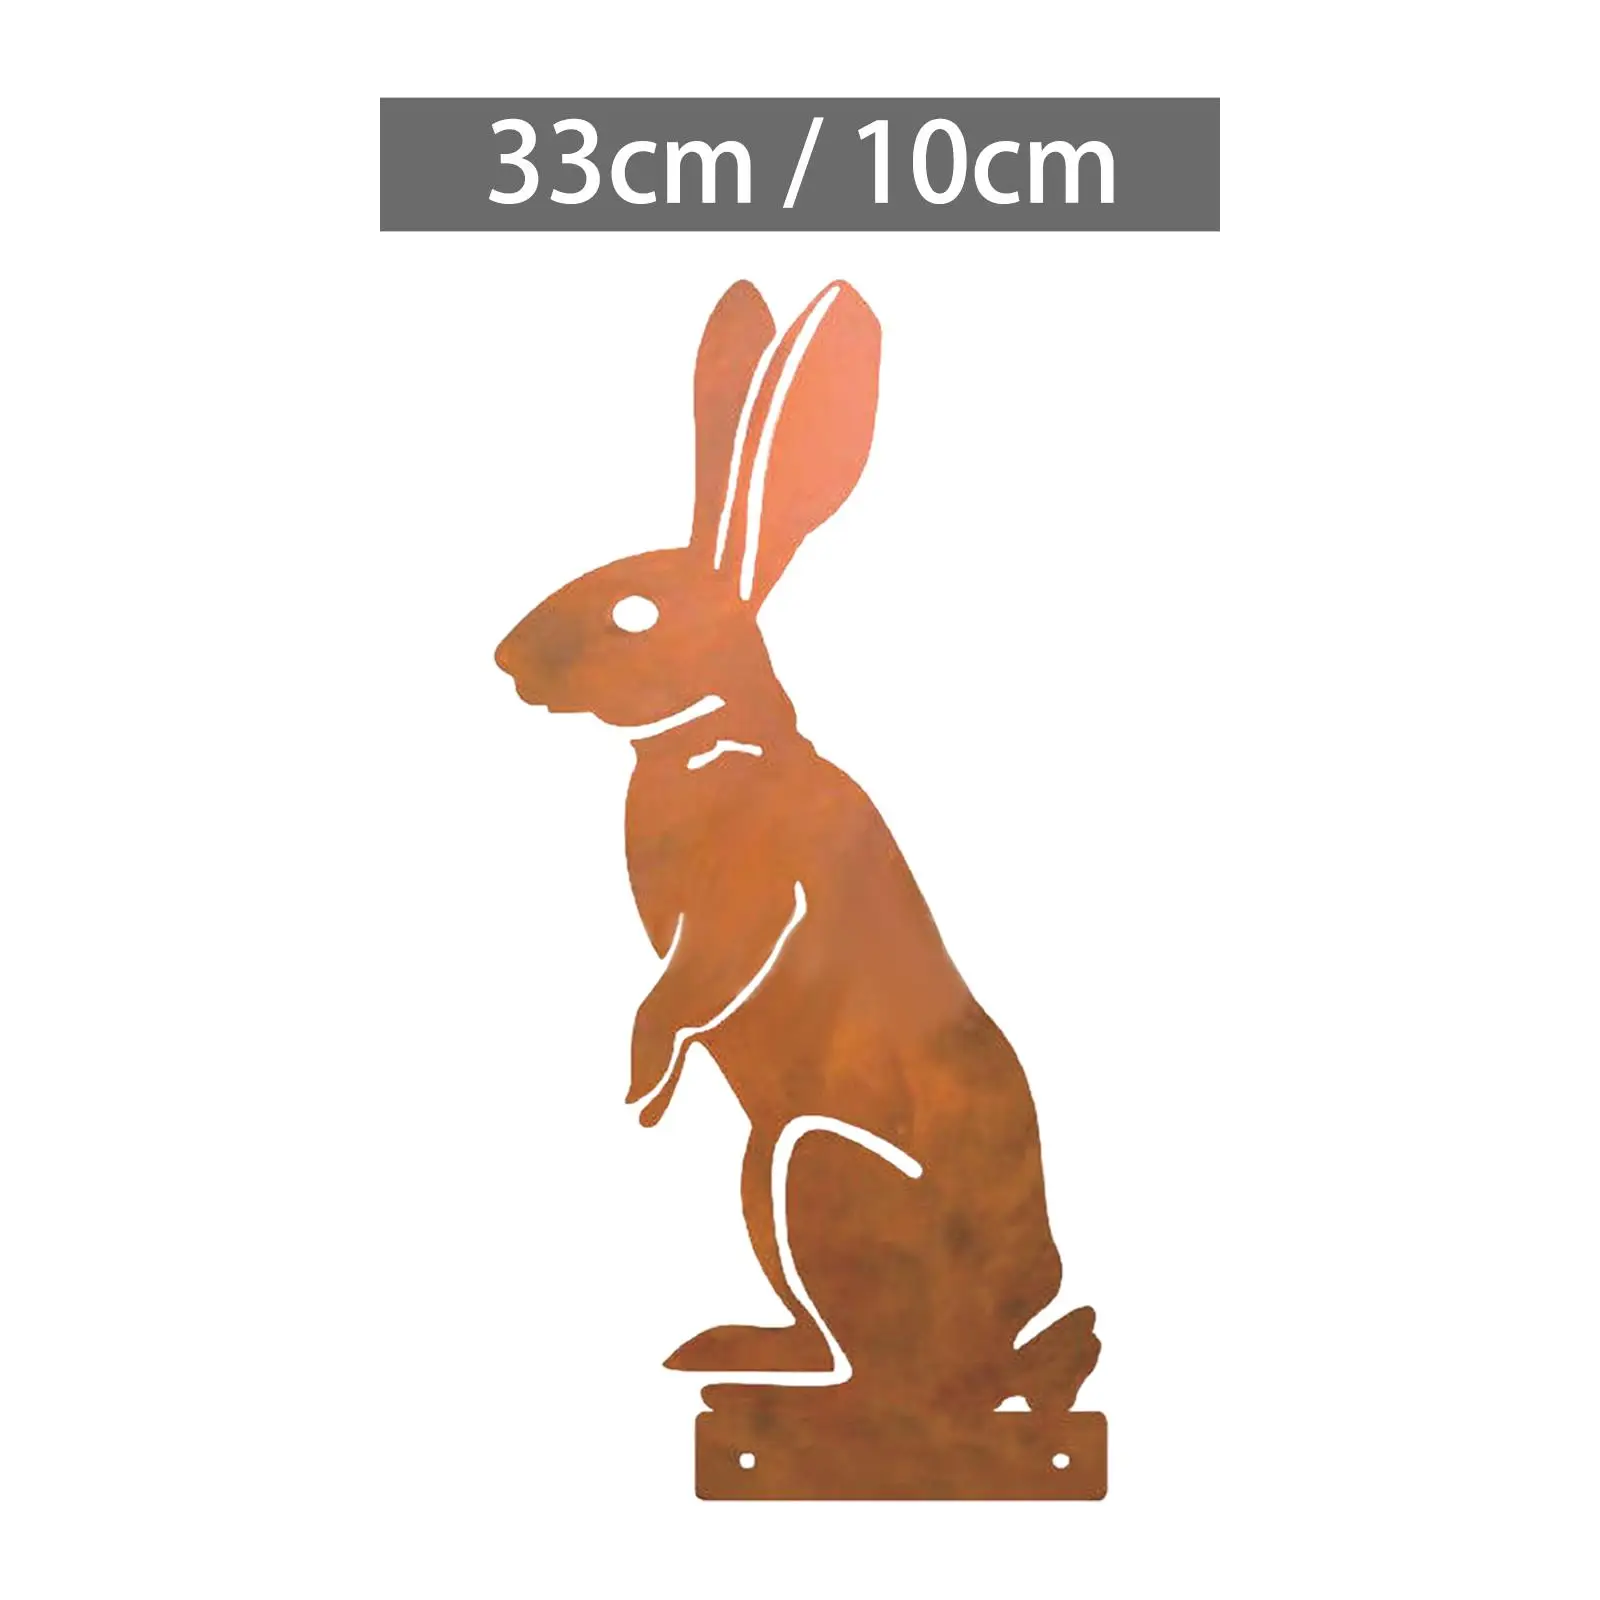 Exquisite Silhouette Statue Lawn Ground Arts Sculpture Decoration Landscaping Crafts Bunny Figurines for Lawn Patio Rustproof